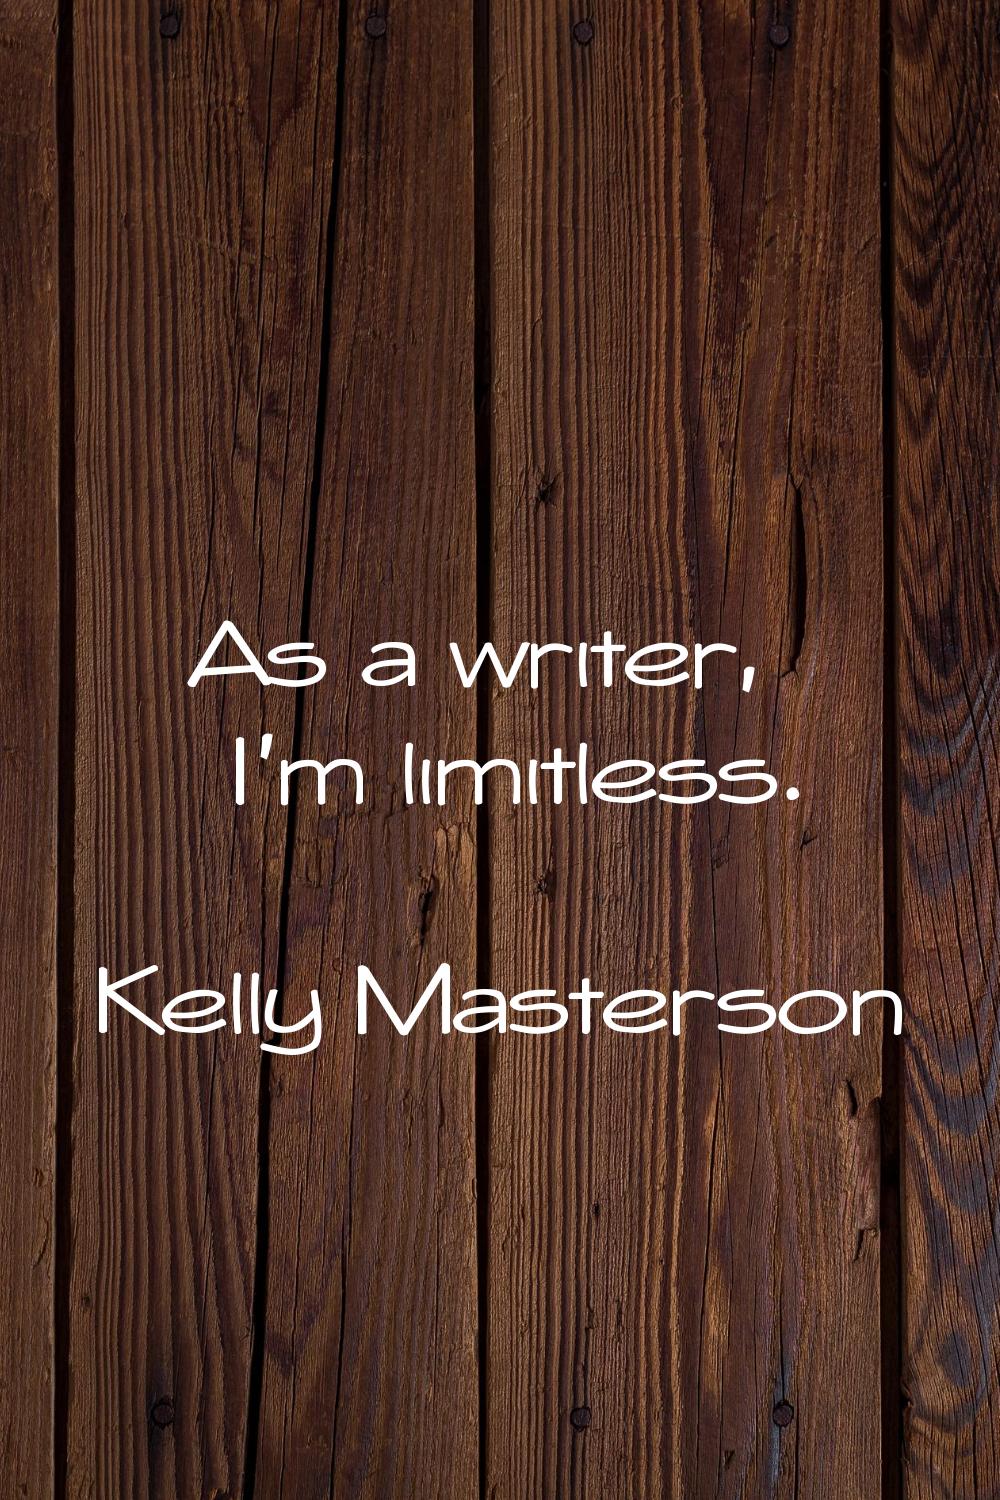 As a writer, I'm limitless.